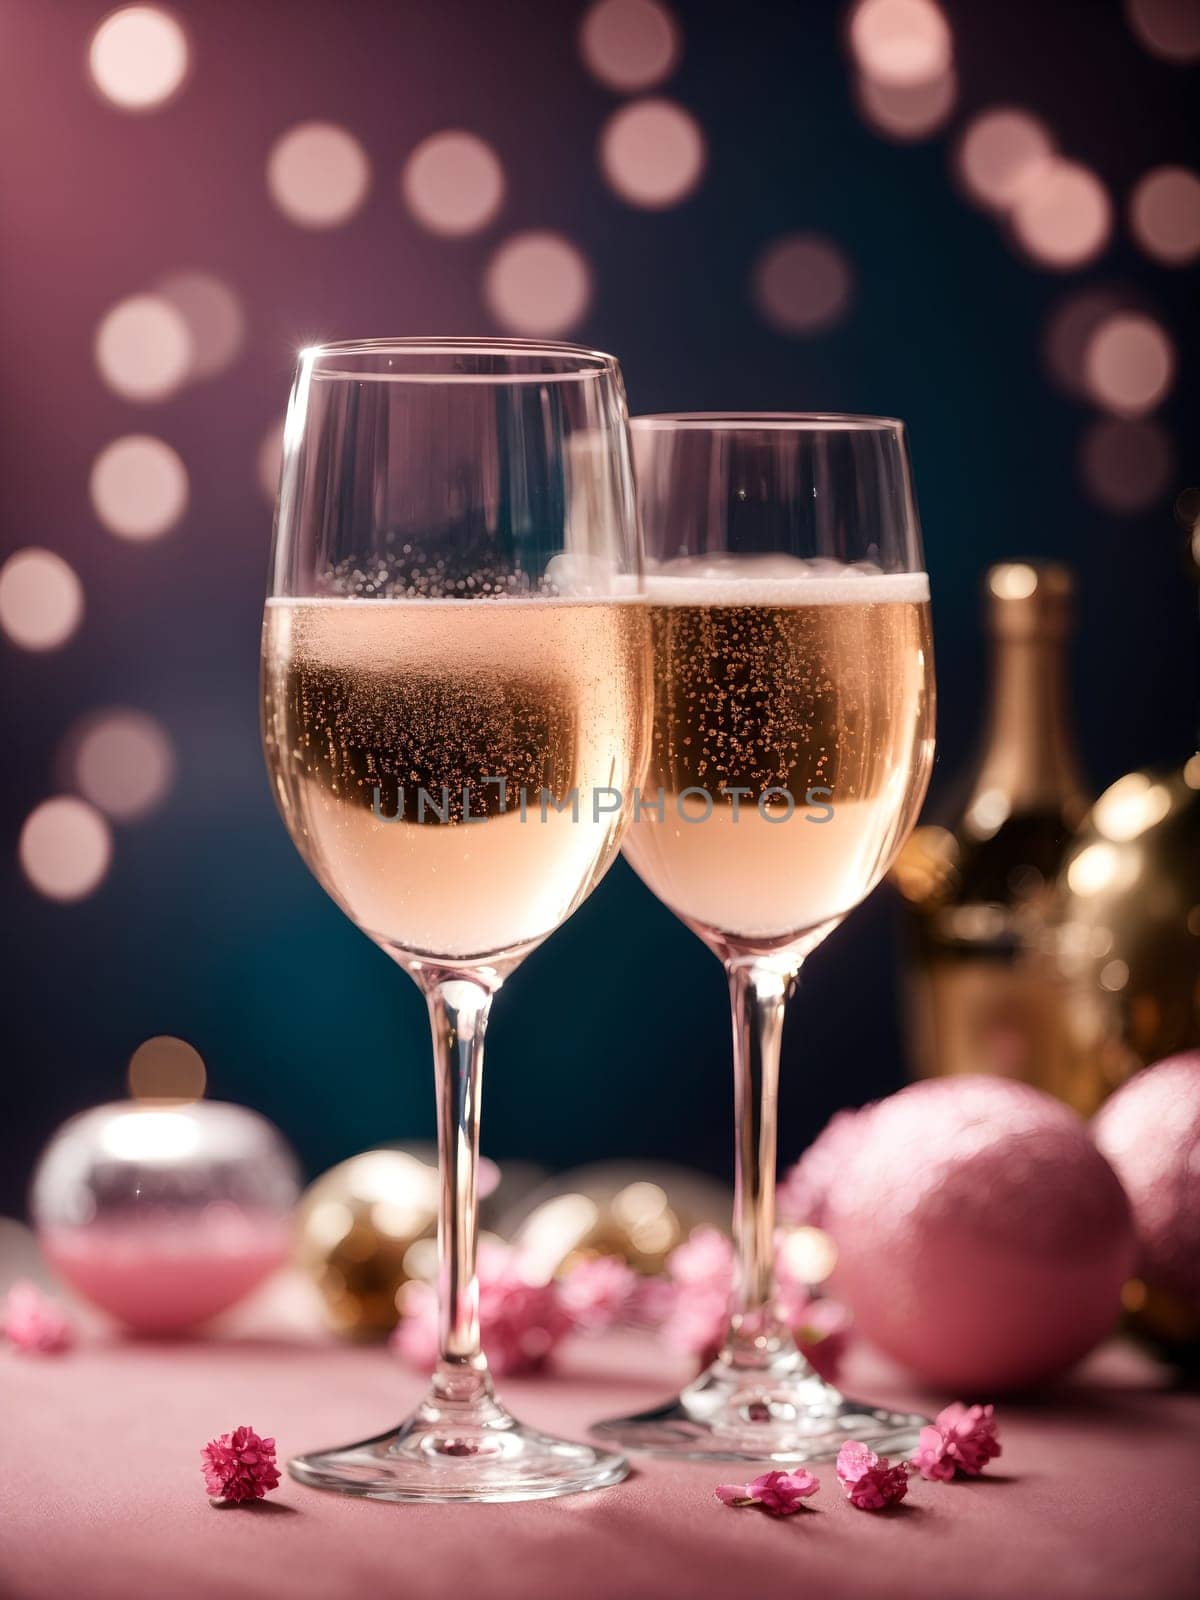 Champagne glasses and pink toys on a pink background